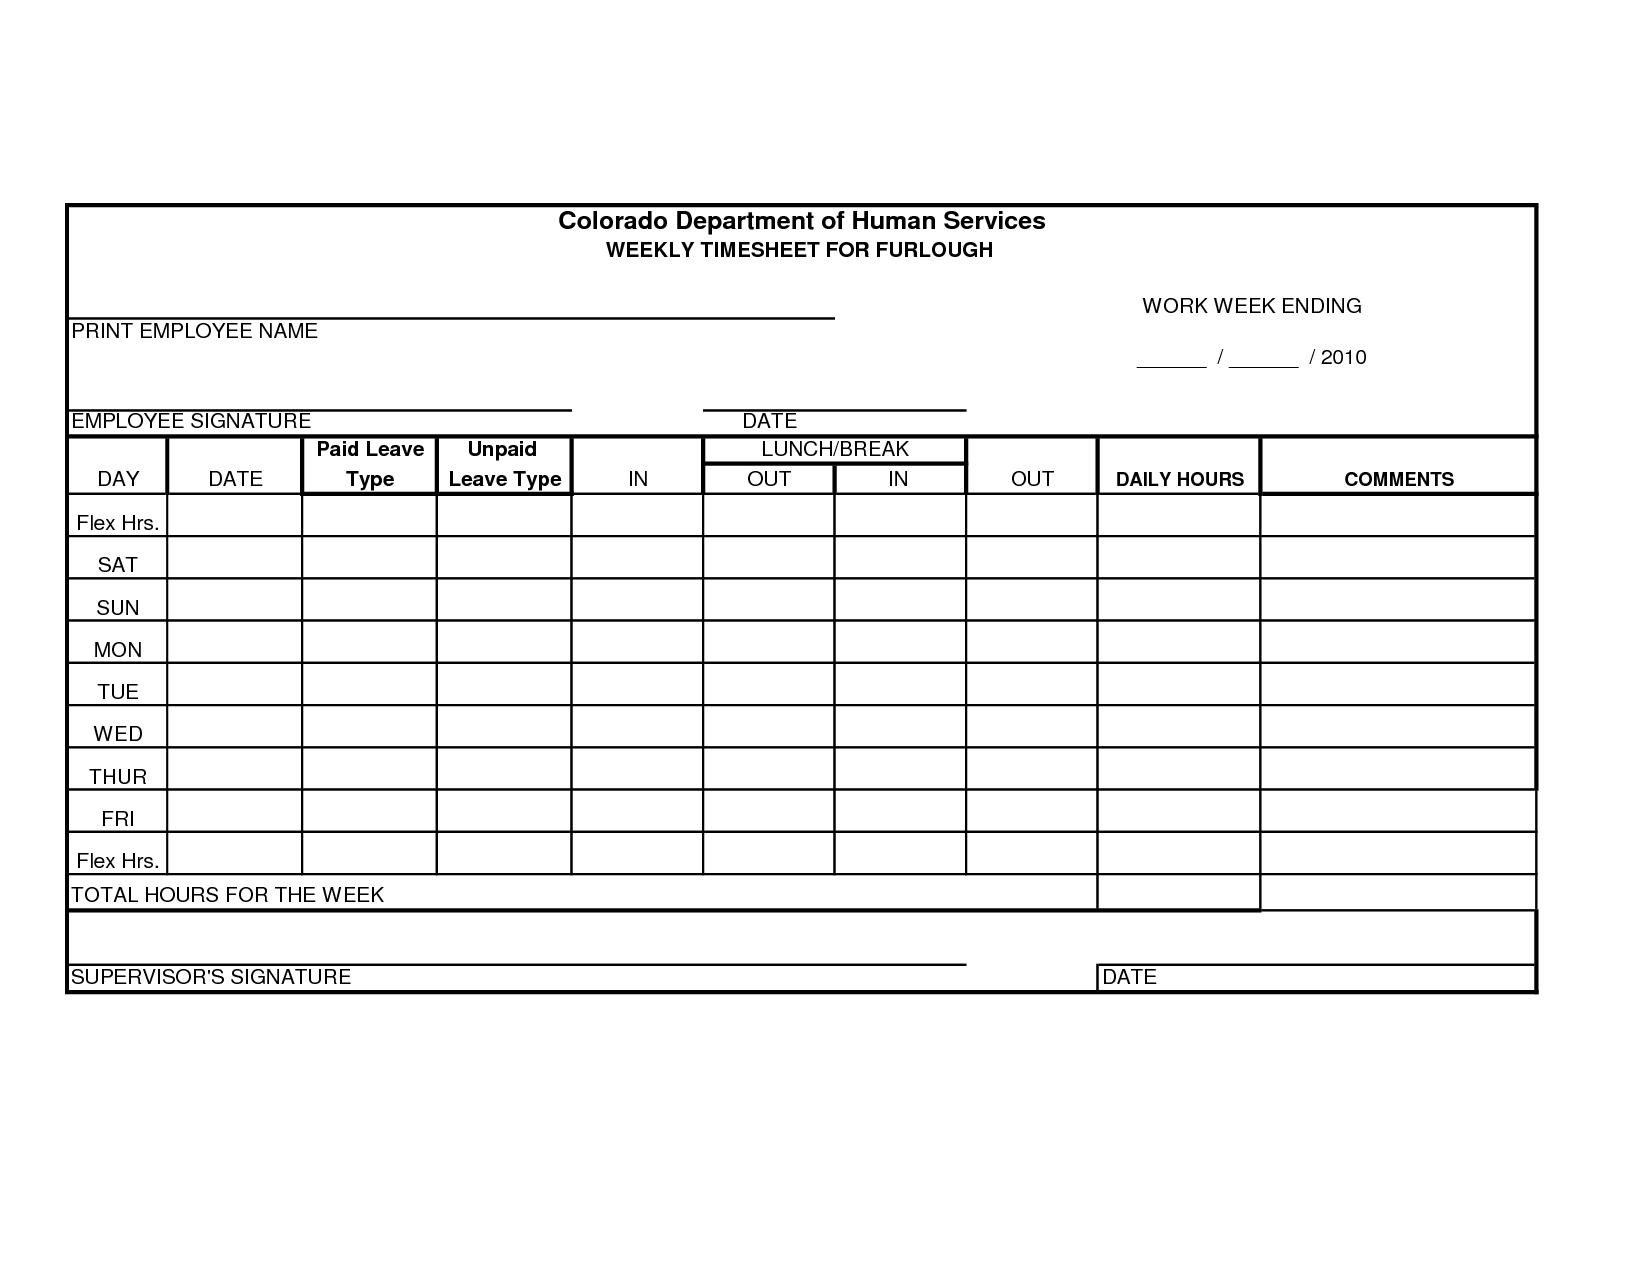 Free Printable Time Sheets Forms | Furlough Weekly Time